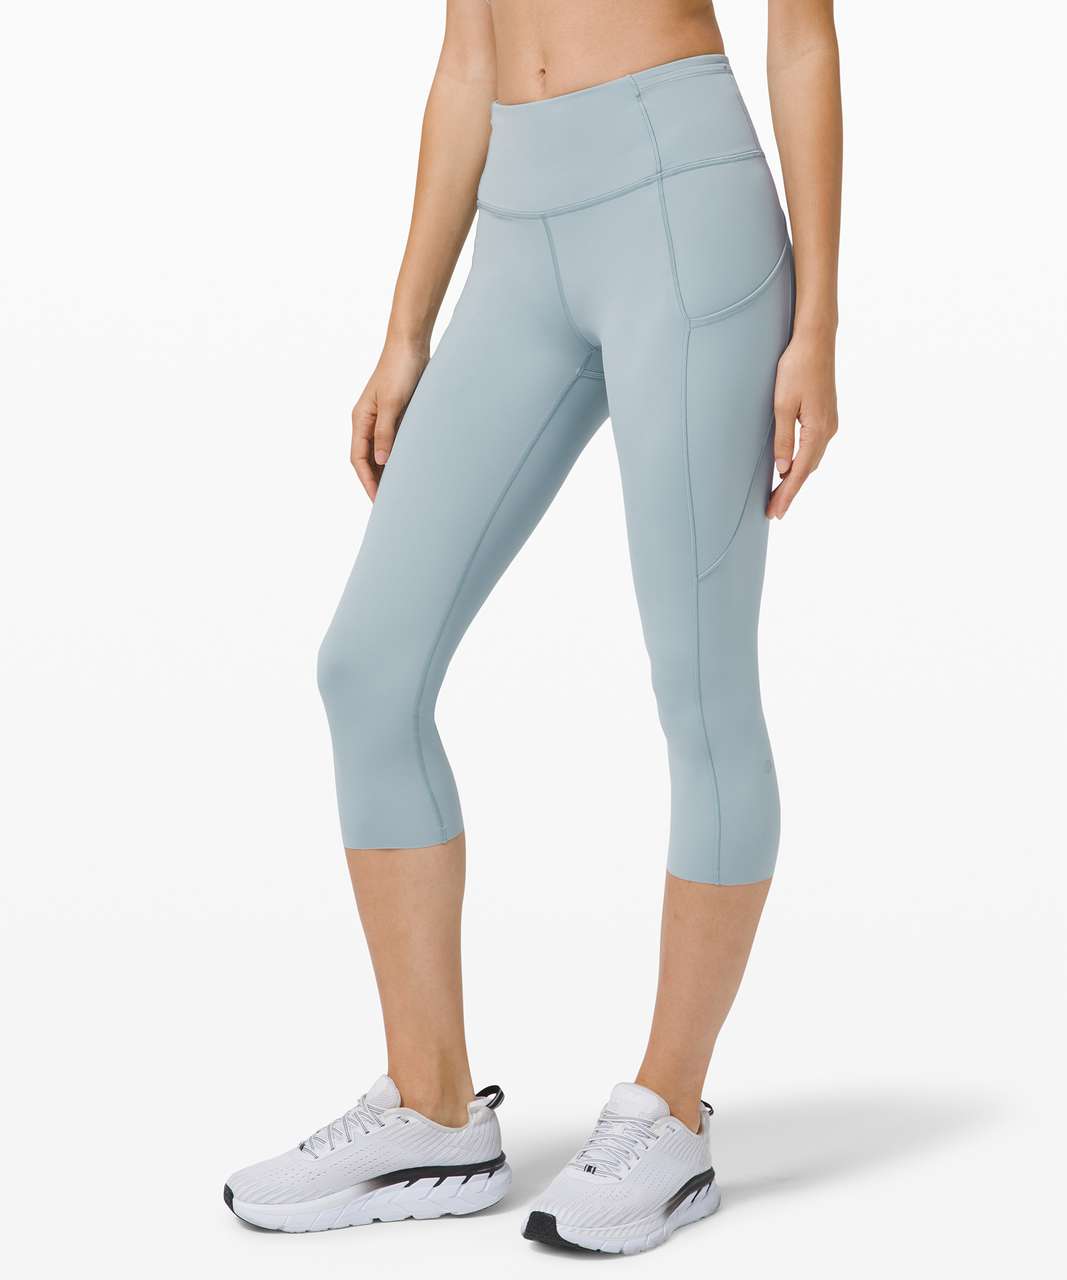 Lululemon Fast and Free Crop II 19" *Non-Reflective - Blue Cast